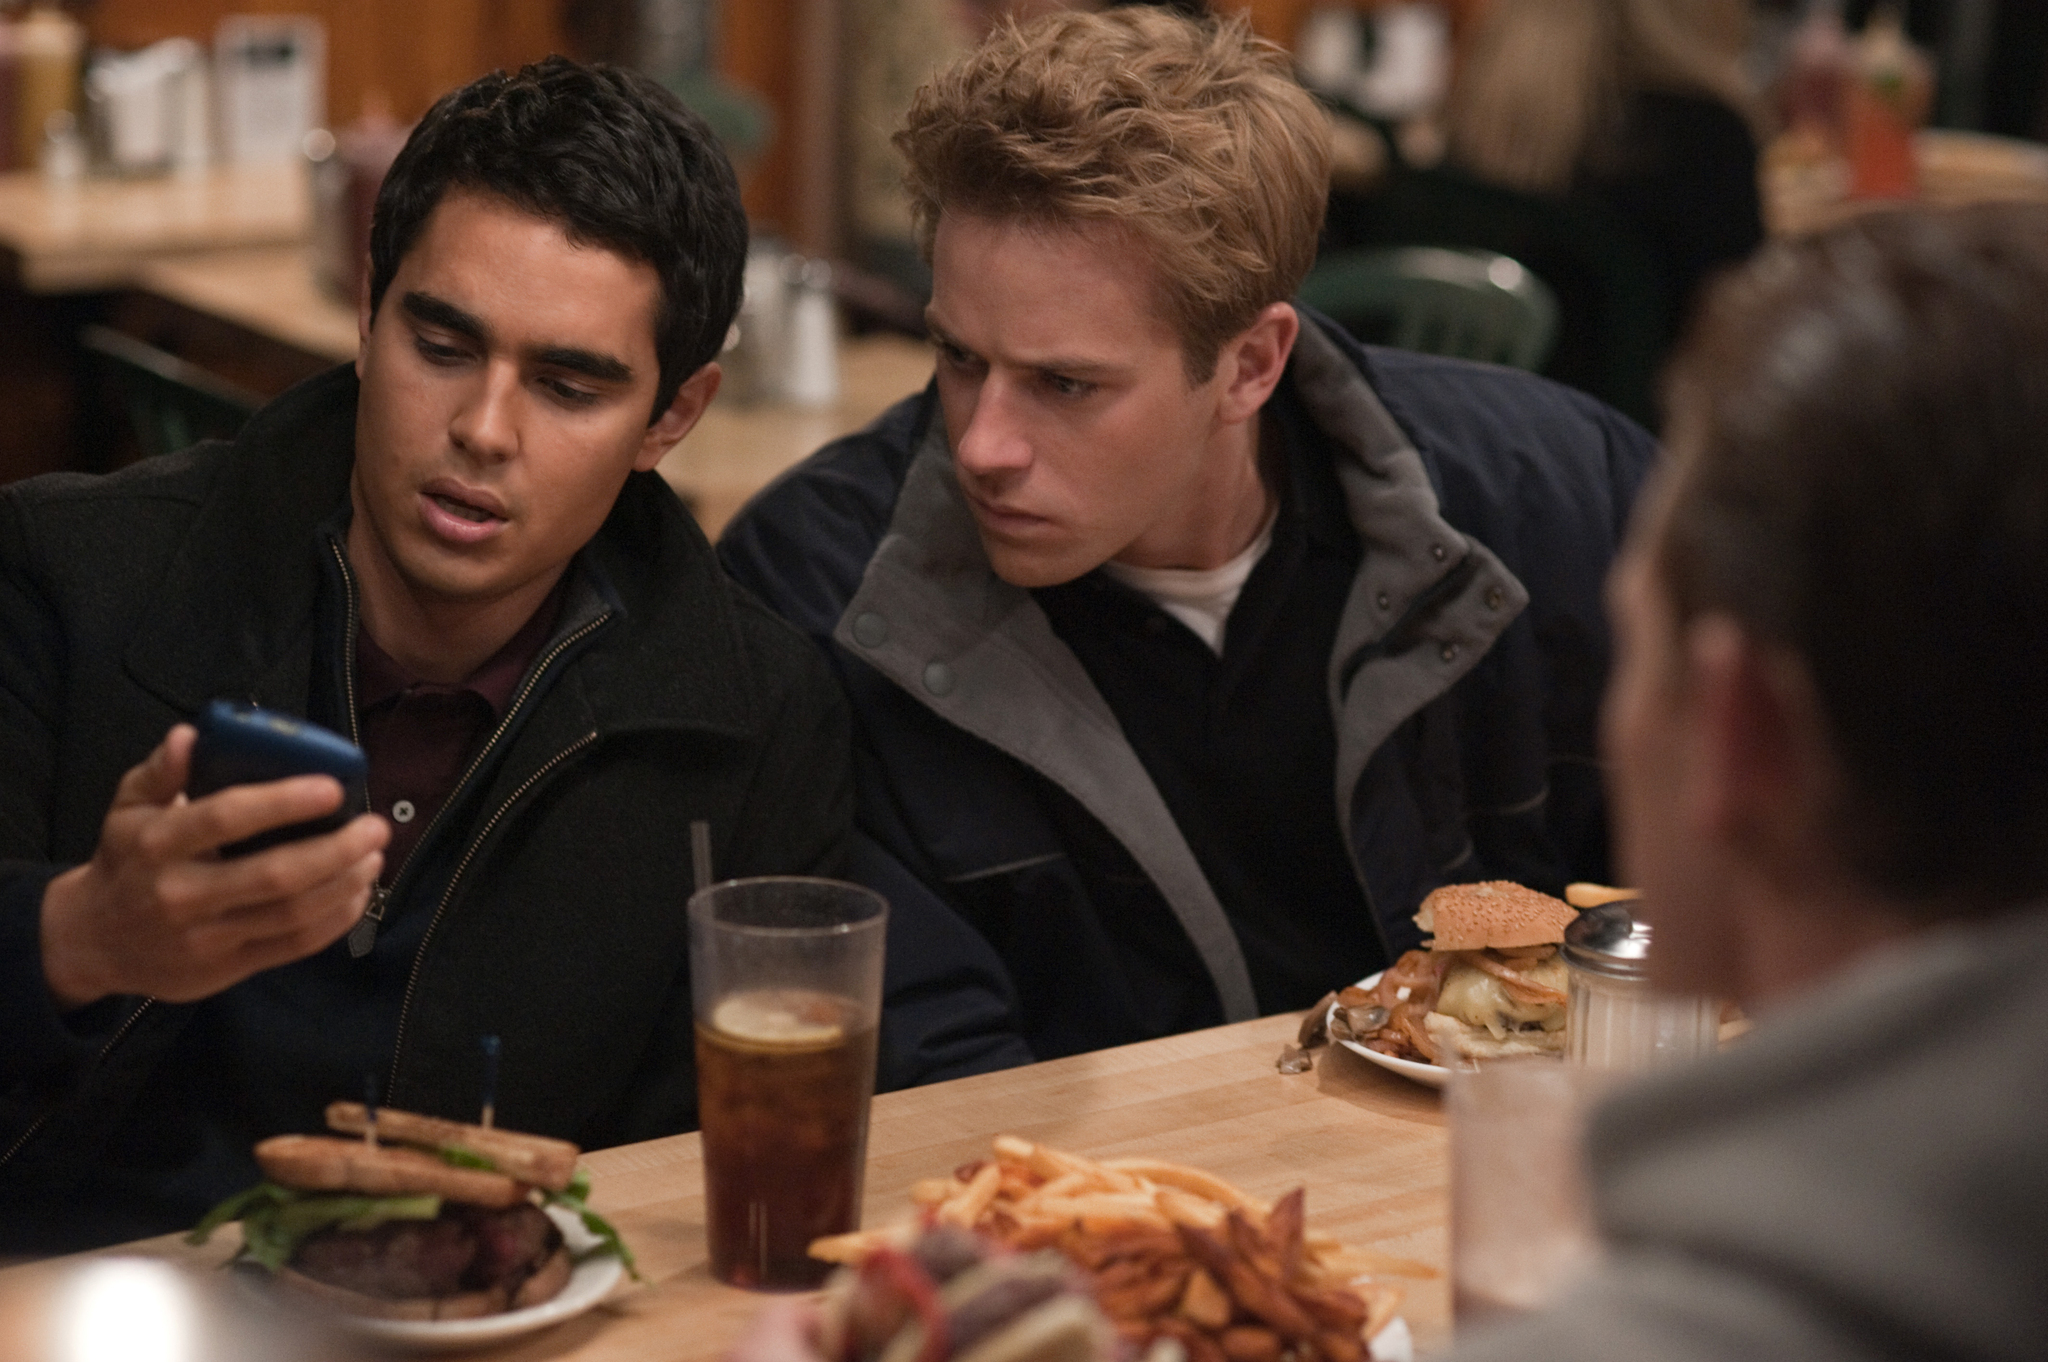 Still of Jesse Eisenberg, Max Minghella and Armie Hammer in The Social Network (2010)